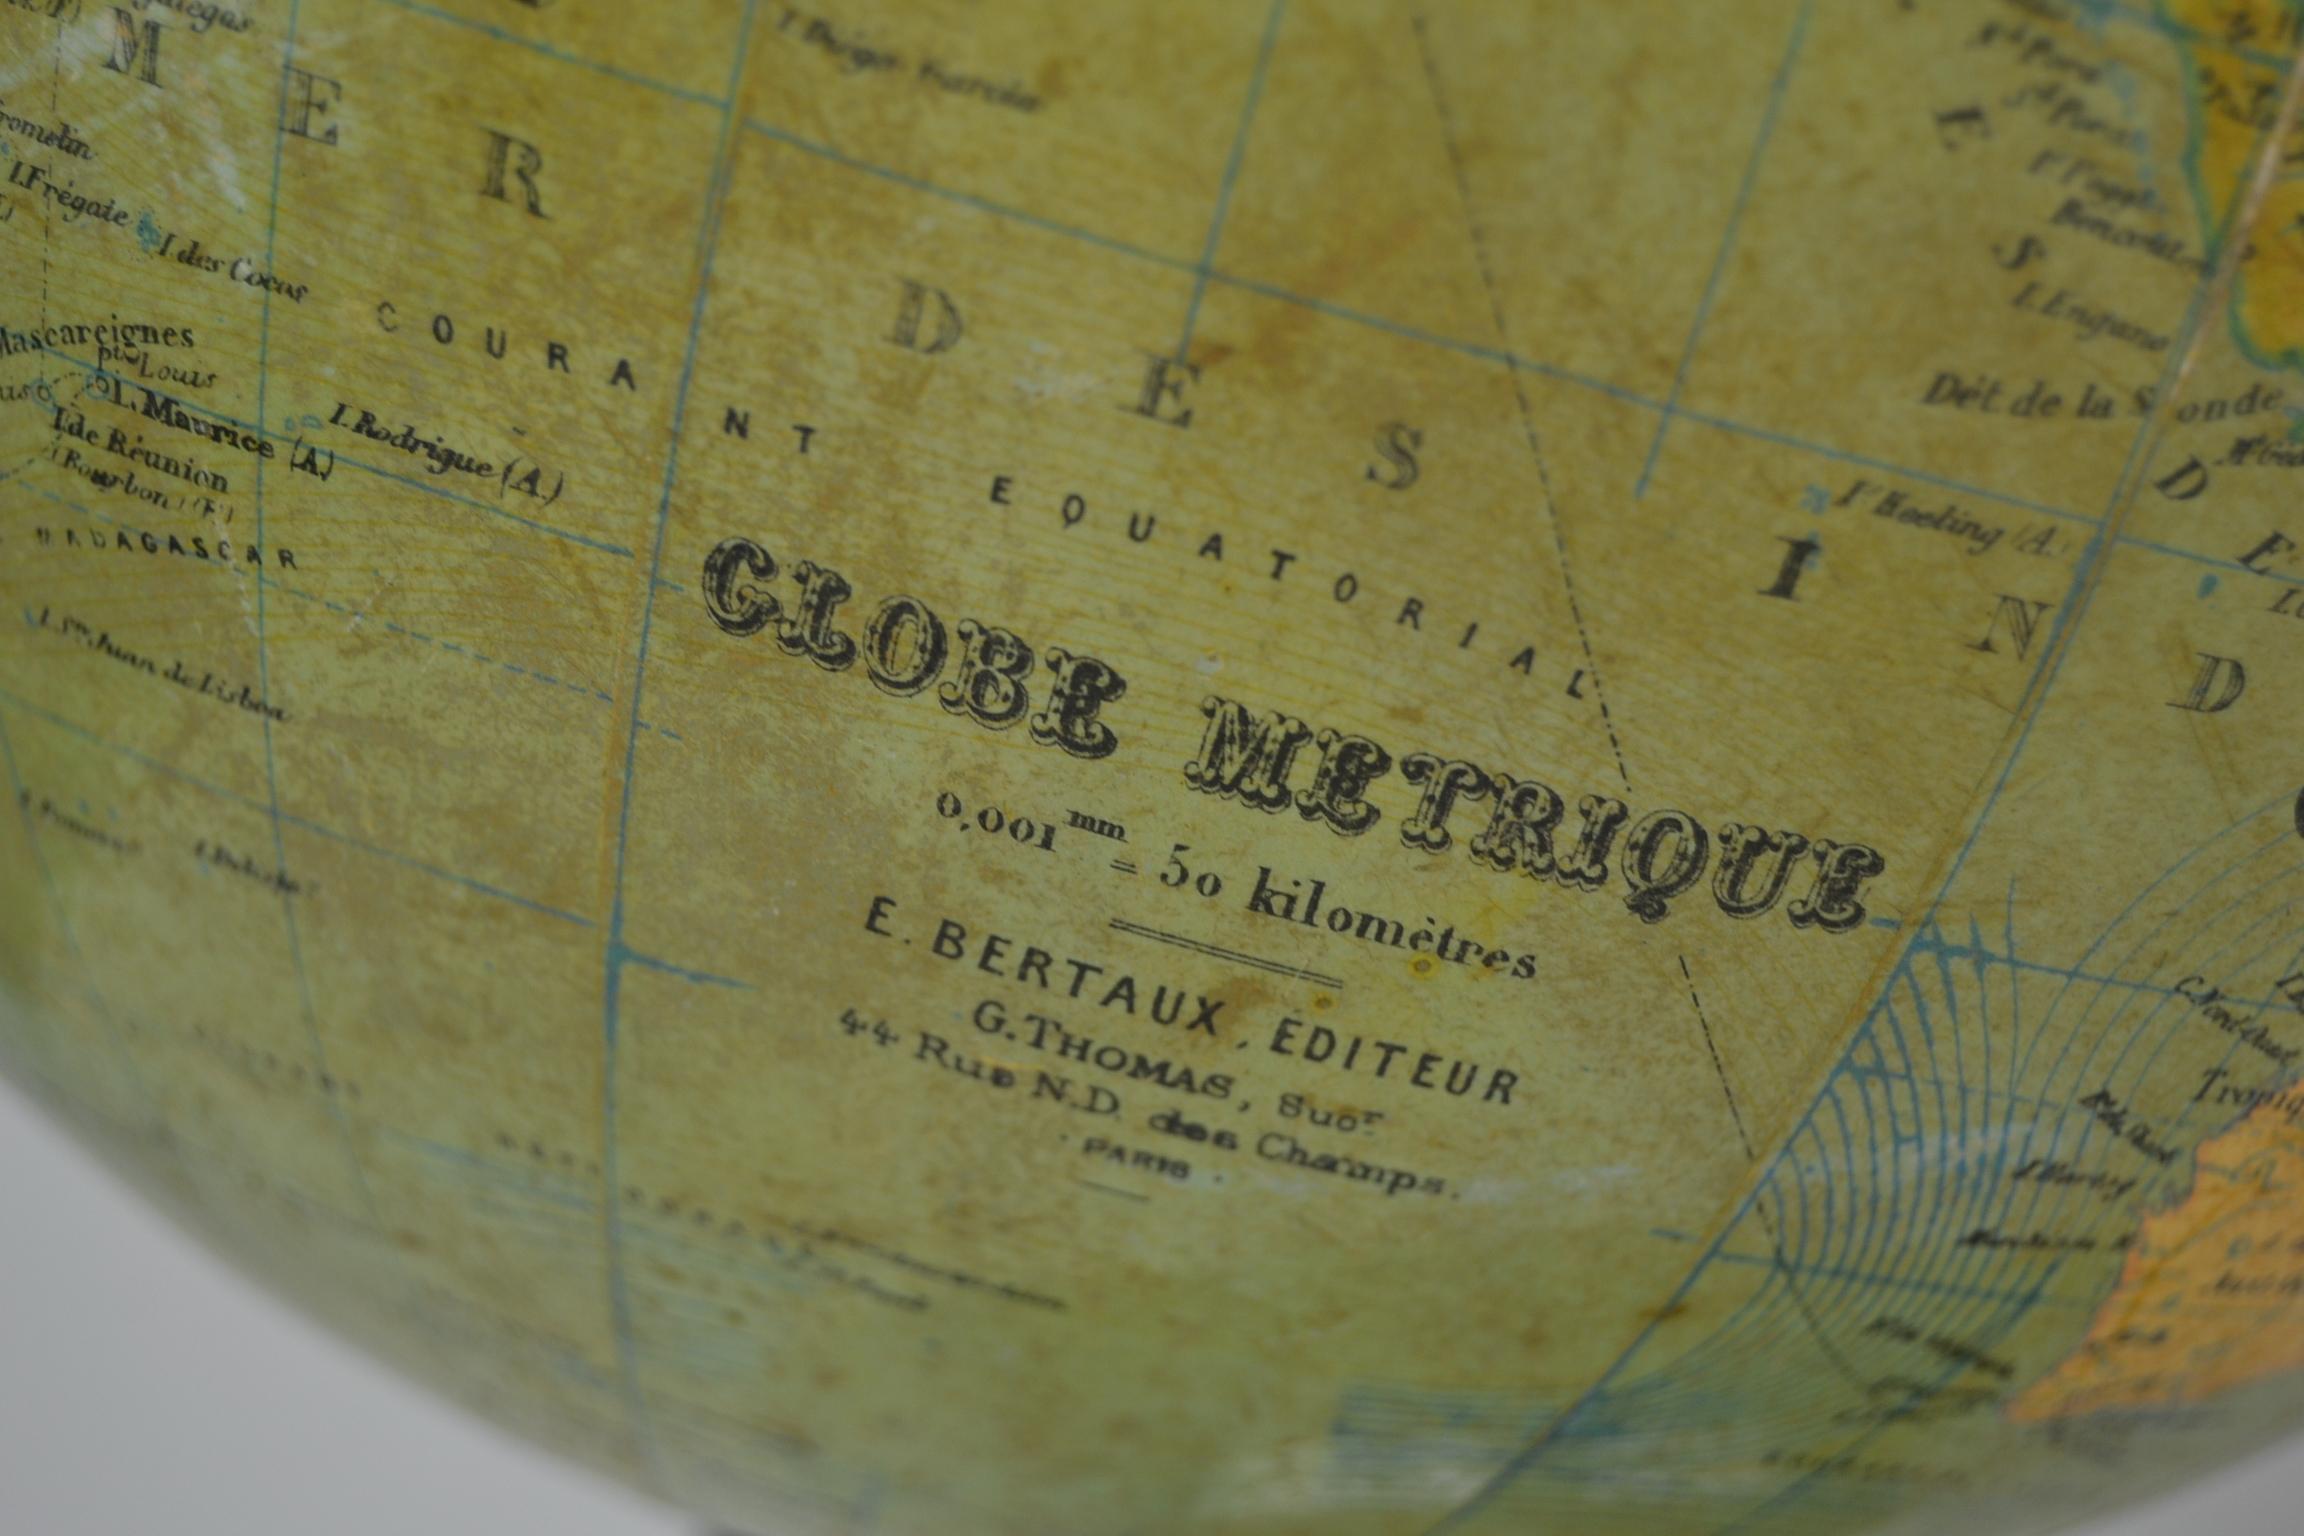 French Art Deco globe Metrique by G.Thomas Paris, France.
The globe is made of paper on plaster and mounted on a chromed base.
On this antique globe is written:
Globe Metrique (Metric) E. Bertaux Editeur, G.Thomas, Rue des Champs Paris.
This Art